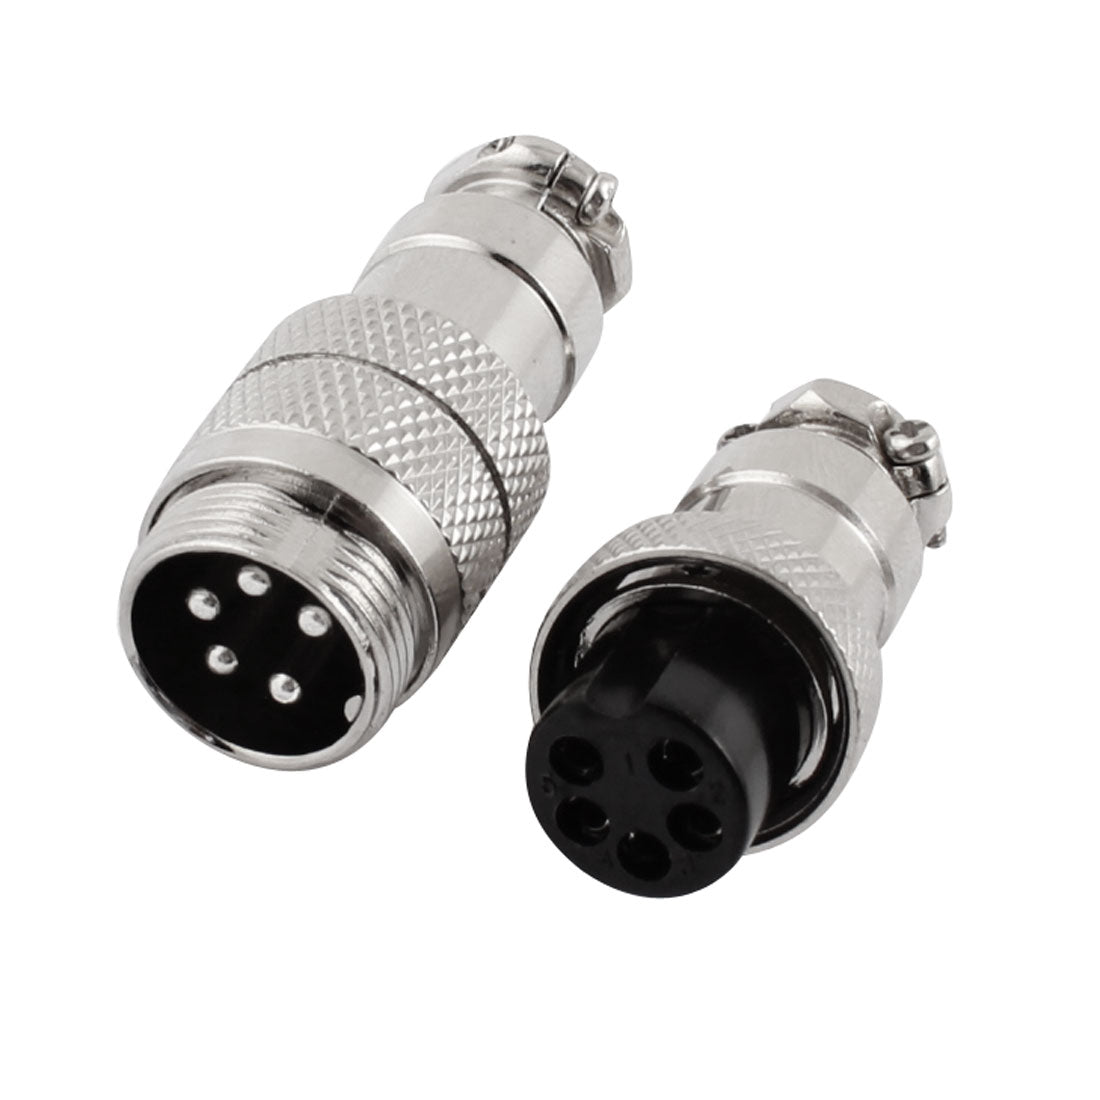 4-pin to 5-pin Aviation Connector Adapter